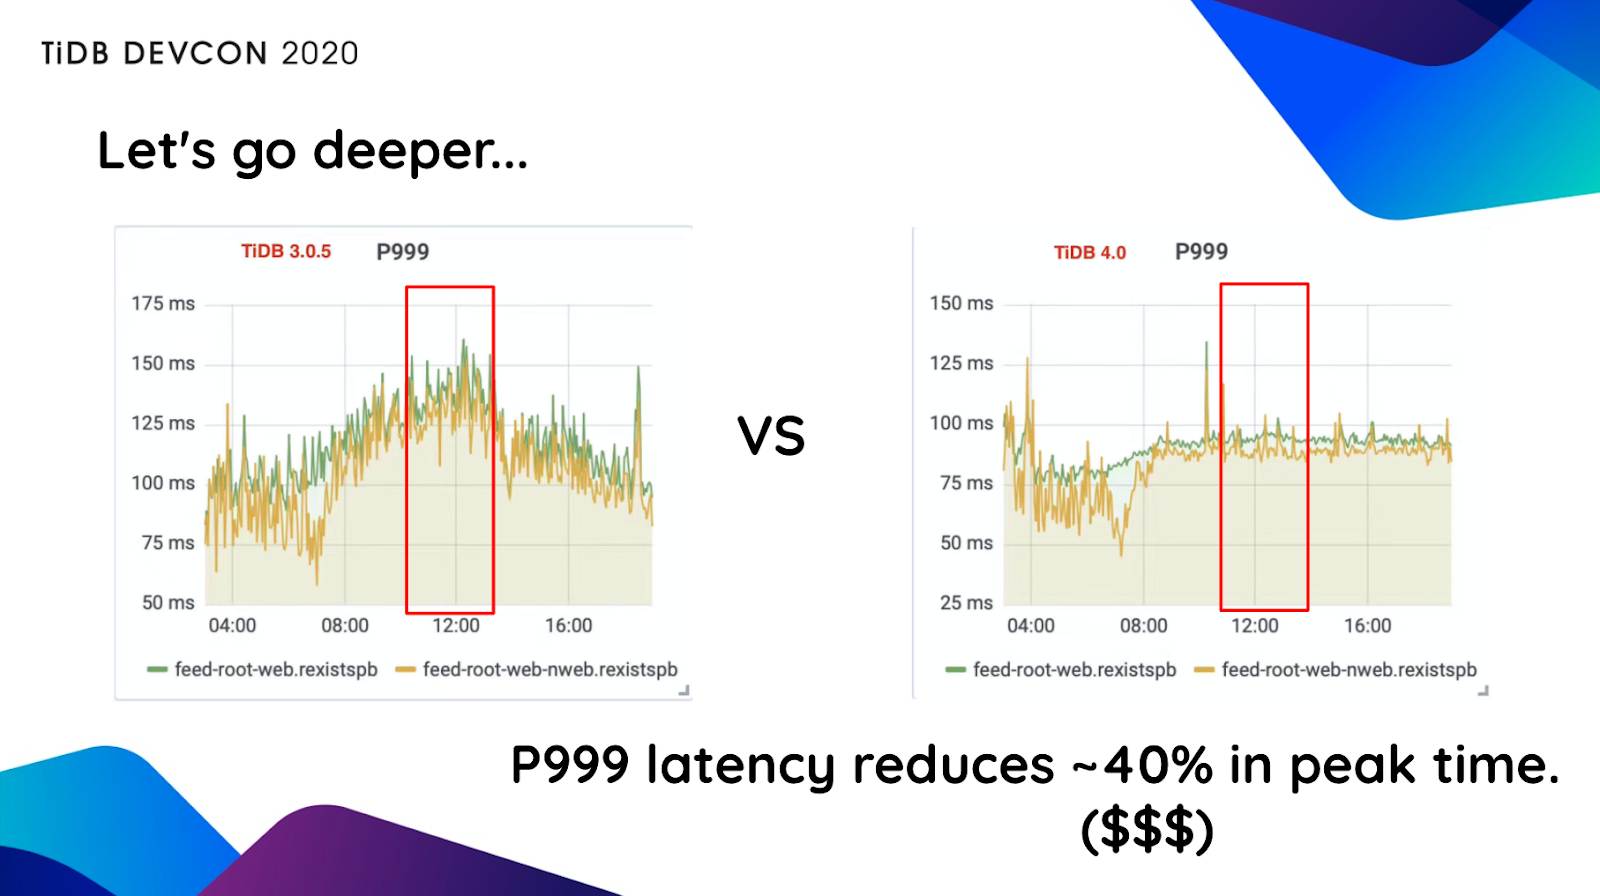 Reduced latency